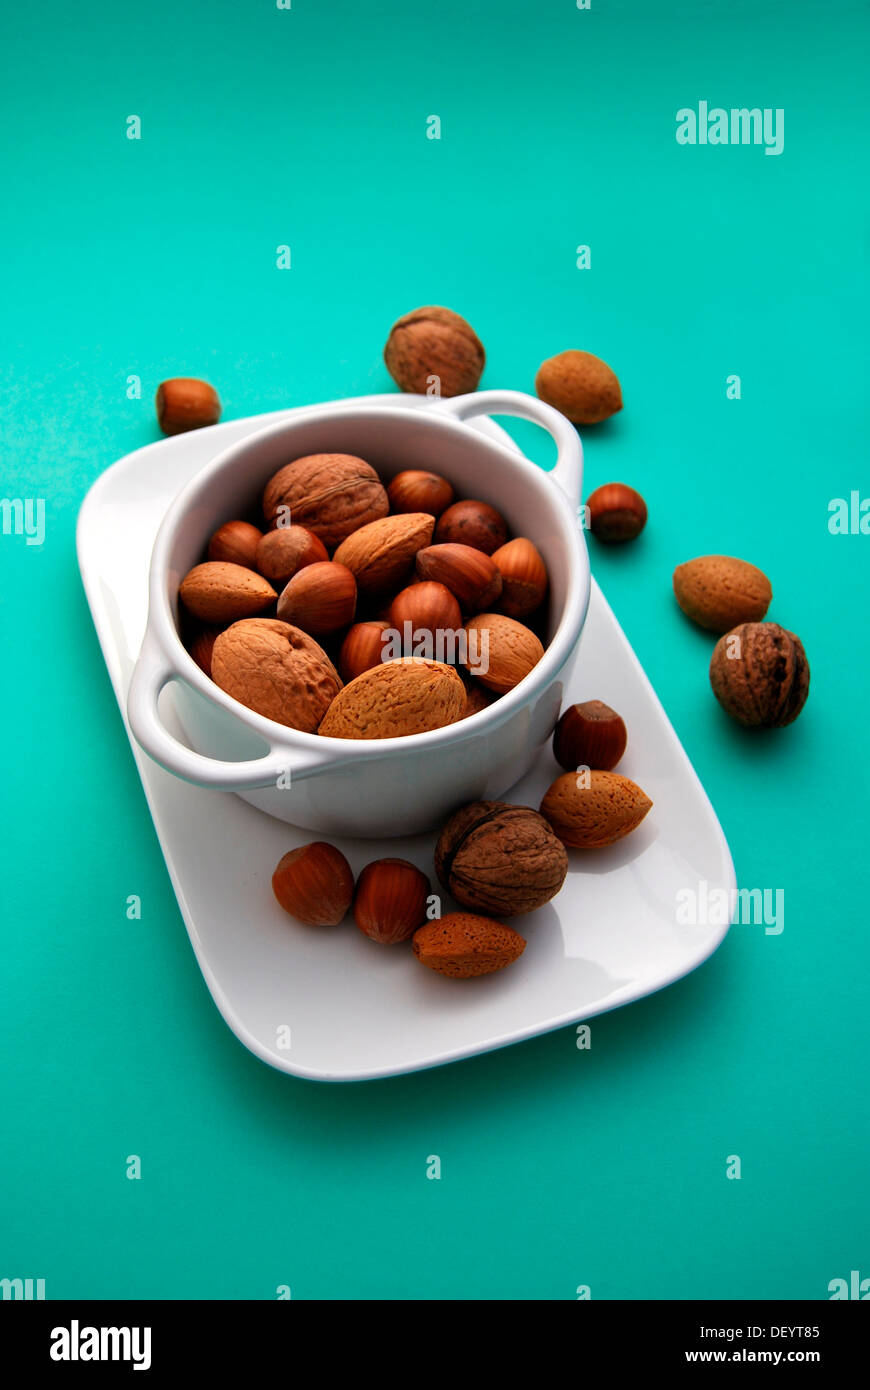 Soup bowl filled with various nuts, walnuts, almonds, hazelnuts Stock Photo